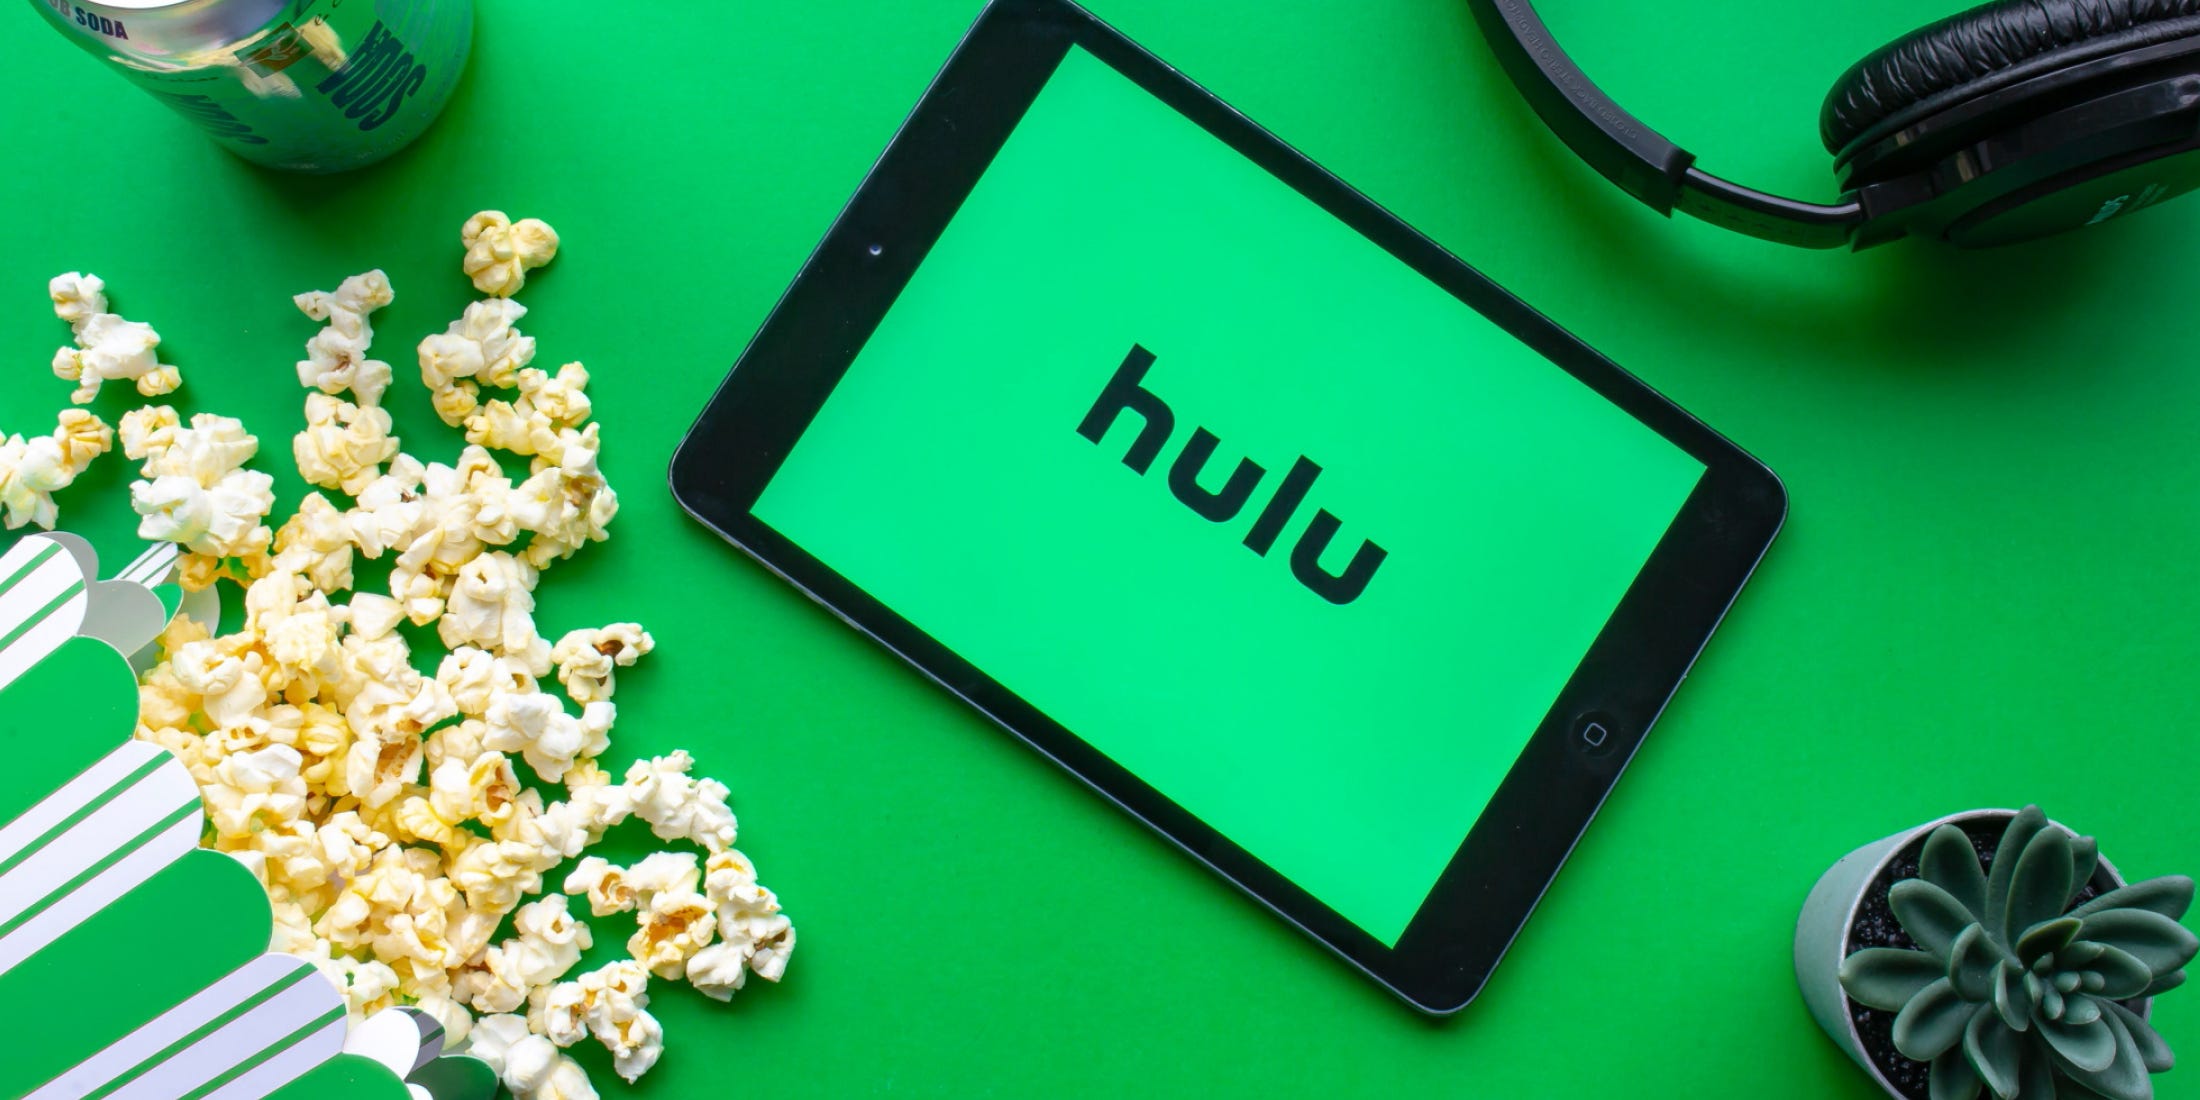 A tablet with a green background and the word “hulu” lays on a green table. It is surrounded by spilled popcorn, a succulent plant, a green soda can, and black headphones.